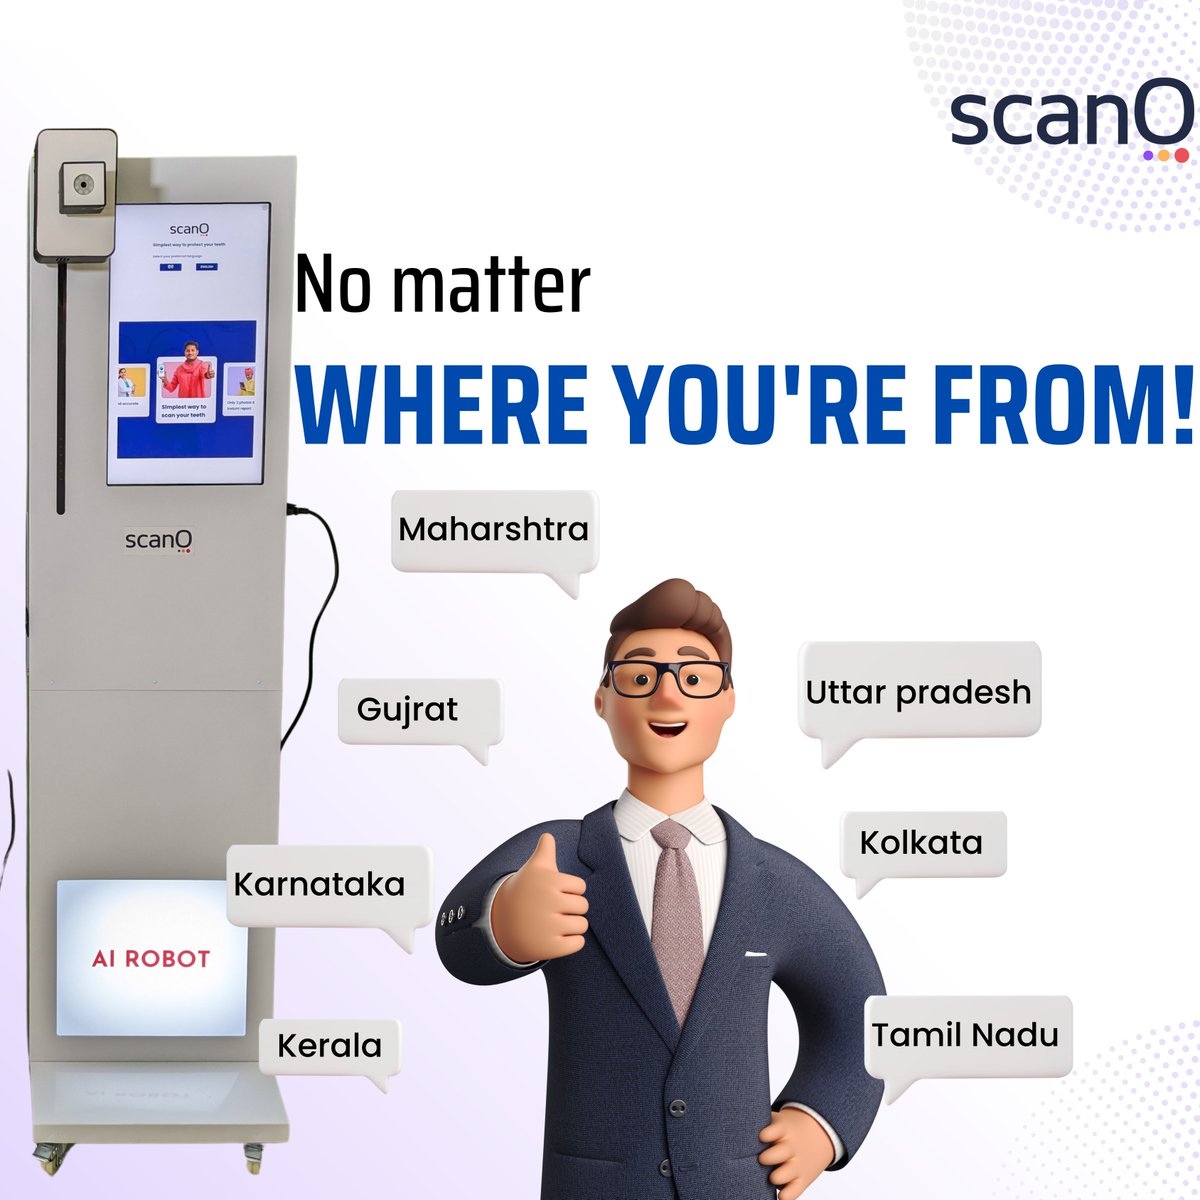 scanO air caters to a global audience! The AI voice guide provides clear instructions in multiple languages during the scanning process. This ensures a comfortable and stress-free experience for patients of all backgrounds. #MultilingualSupport #scanOairAccessibility.